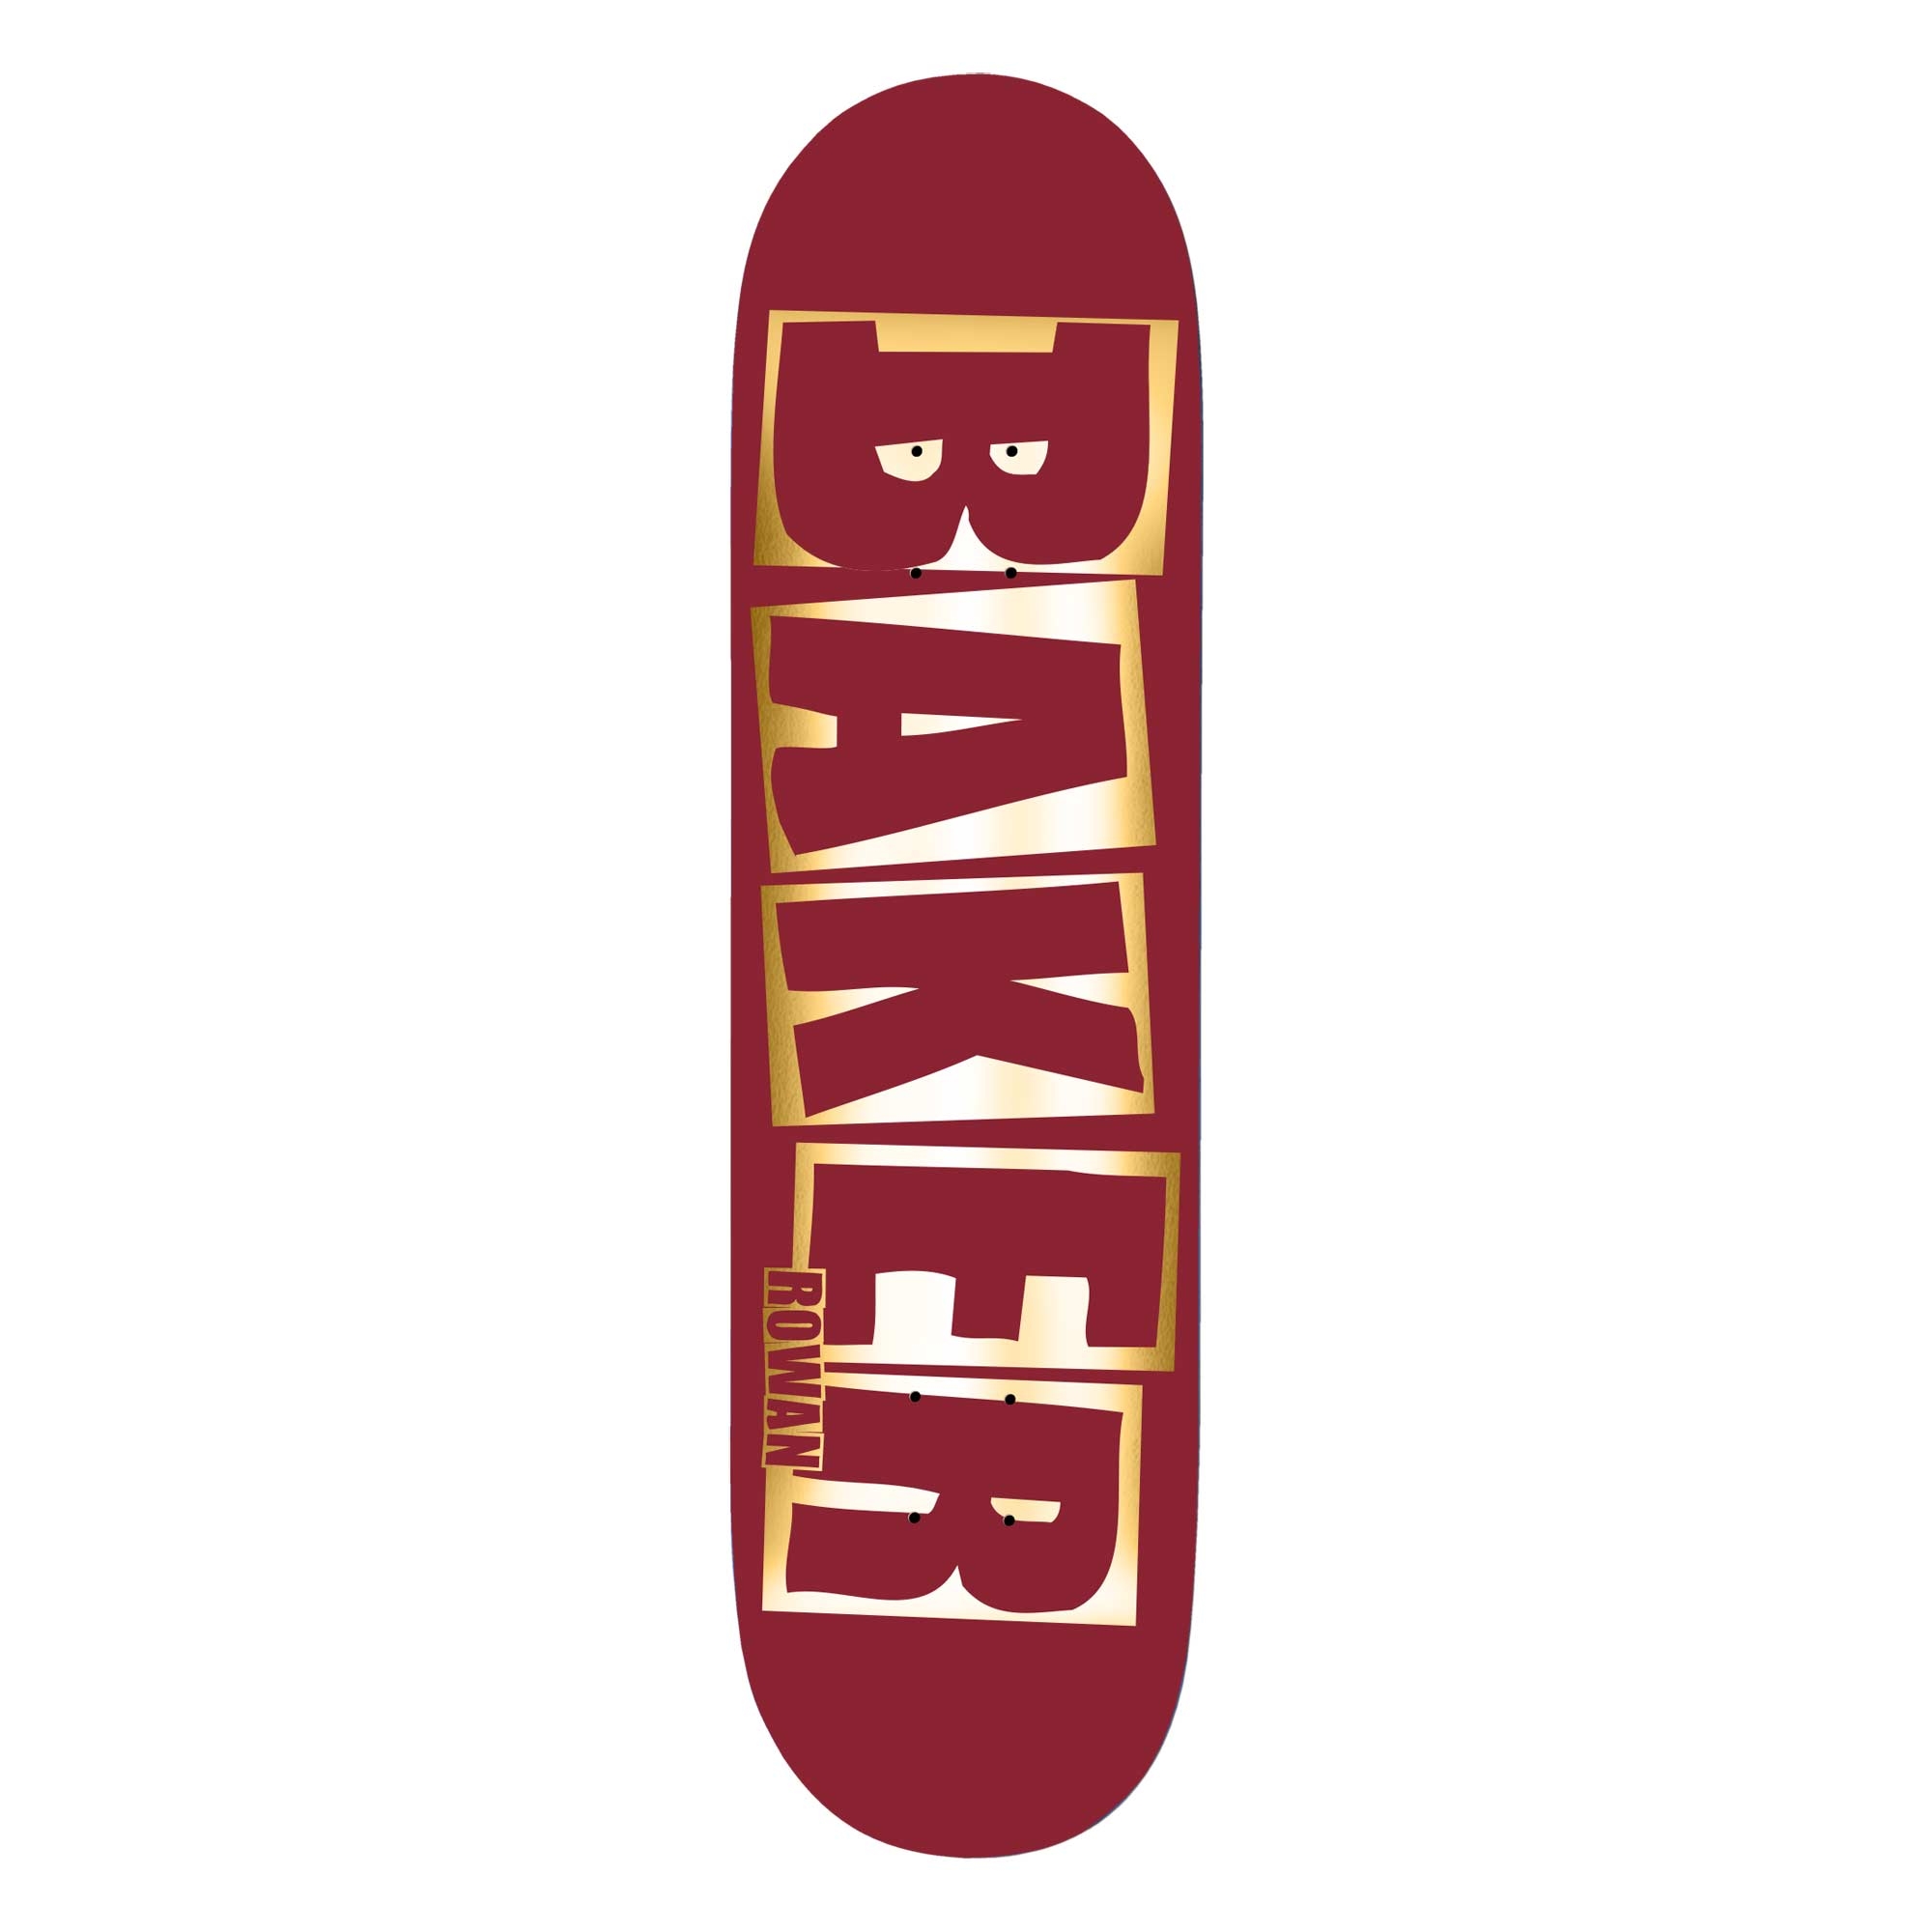 BAKER Deck BRAND NAME RED FOIL B2 RZ 8.3, red 8.3''